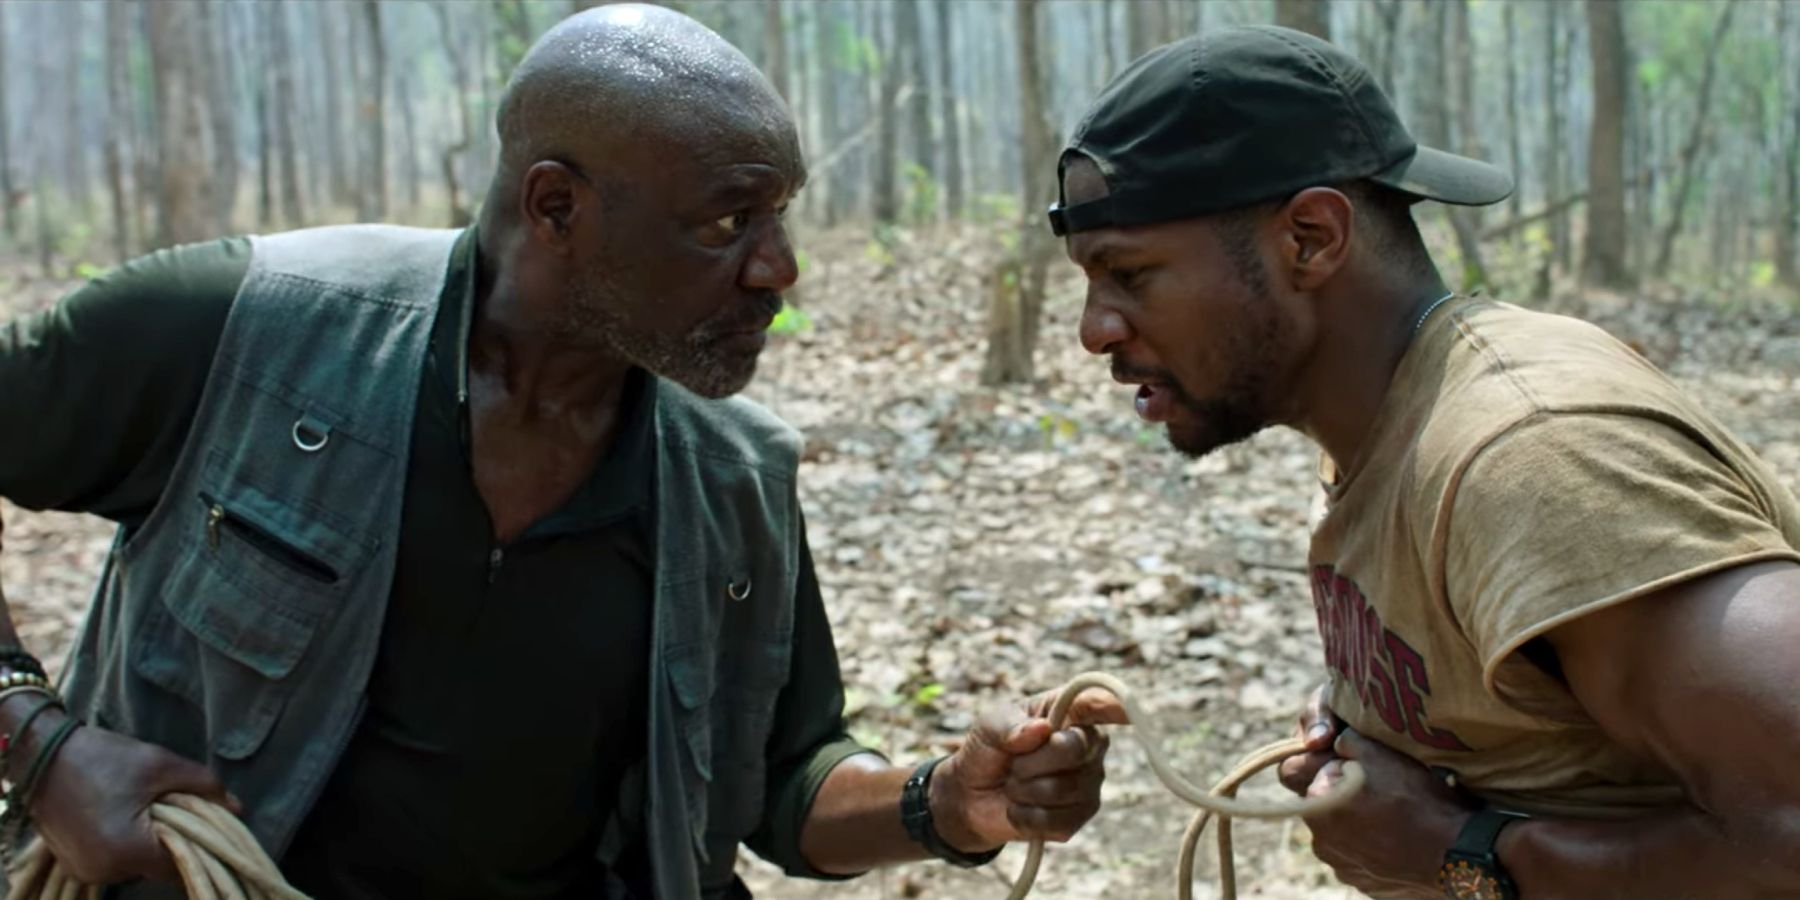 Jonathan Majors and Delroy Lindo in Da 5 bloods